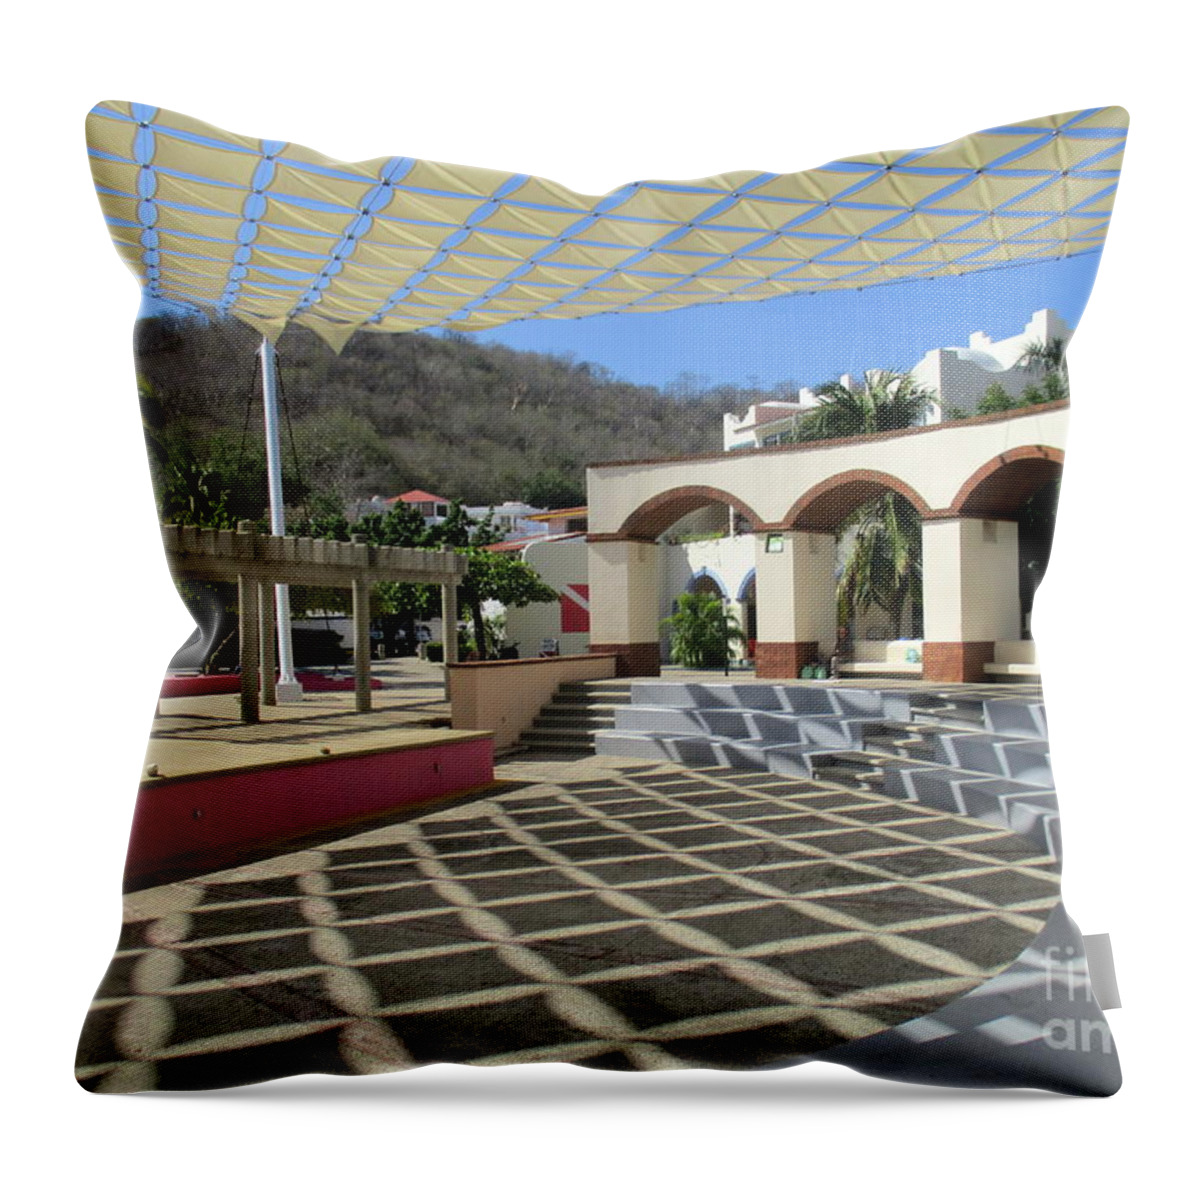 Yellow Throw Pillow featuring the photograph Huatulco Amphitheater 1 by Randall Weidner